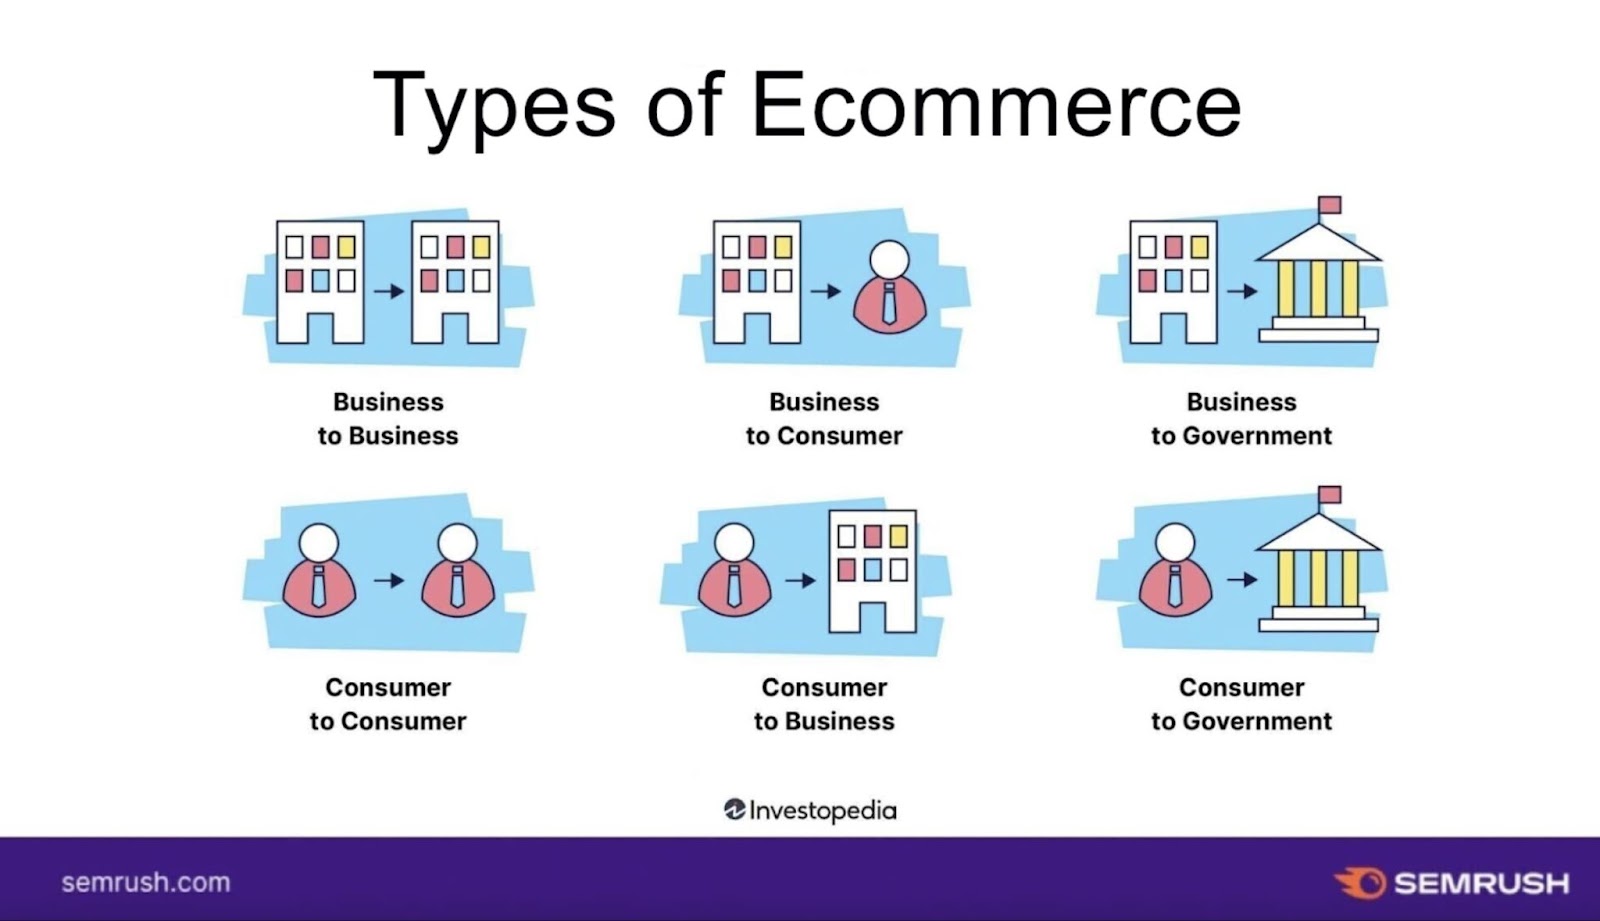 A list of six different types of ecommerce